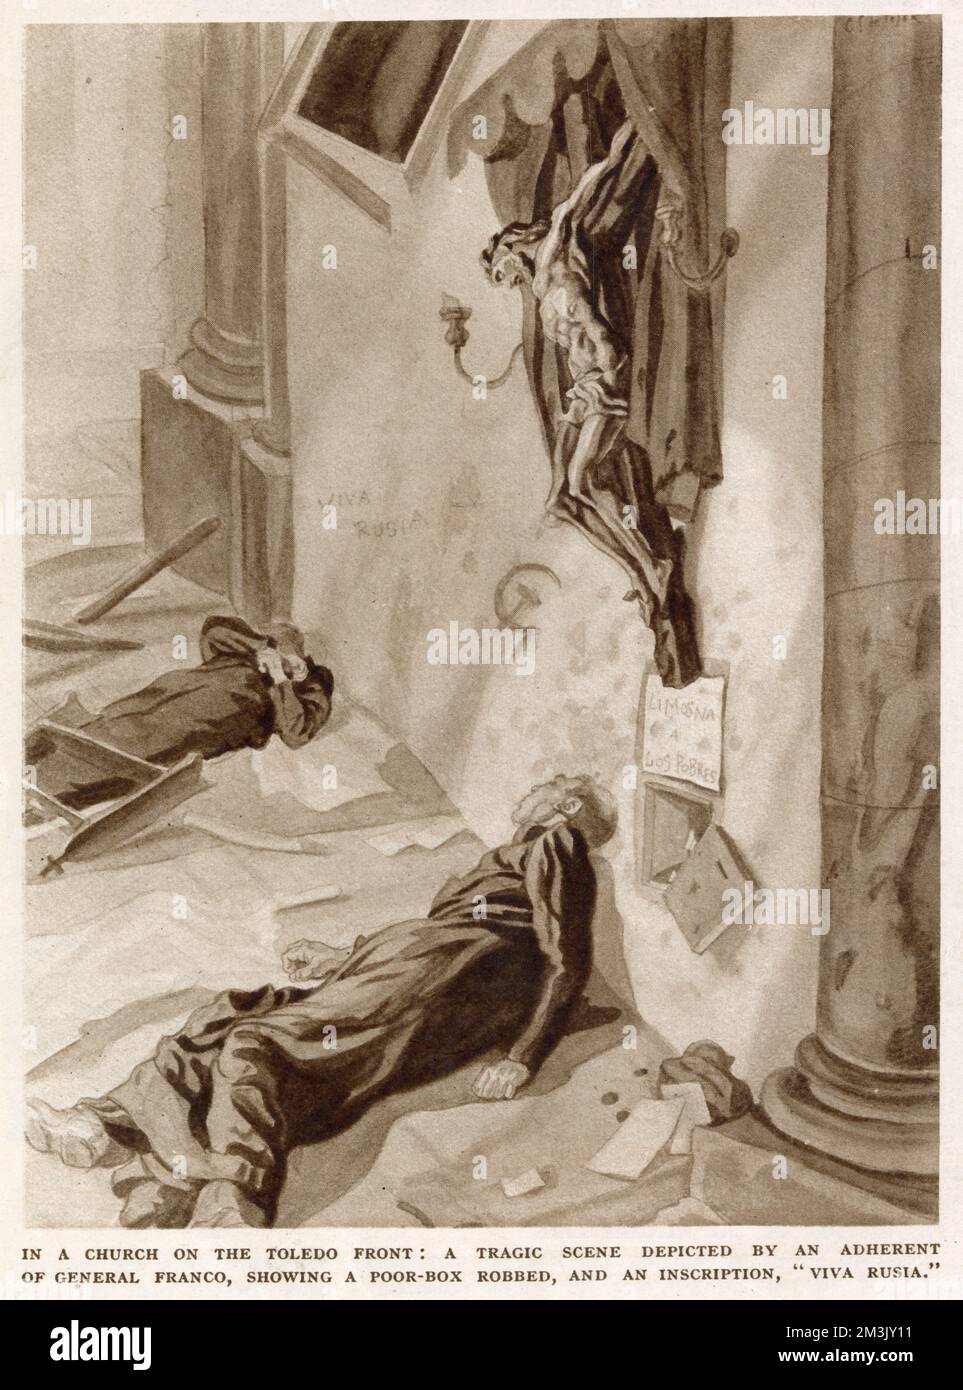 A scene in a church, with the priests dead and the poor-box robbed, during the Spanish Civil War. On the wall, a hammer and sickle motif and the legend 'Viva Russia' has been painted.  The Spanish Catholic Church supported the Nationalist rebels during the Civil War, which made atrocities such as this one, supposedly performed by the Republican socialists, more inevitable. Such images, whether true or not, were certainly used for propaganda purposes, both in Spain and abroad. Stock Photo